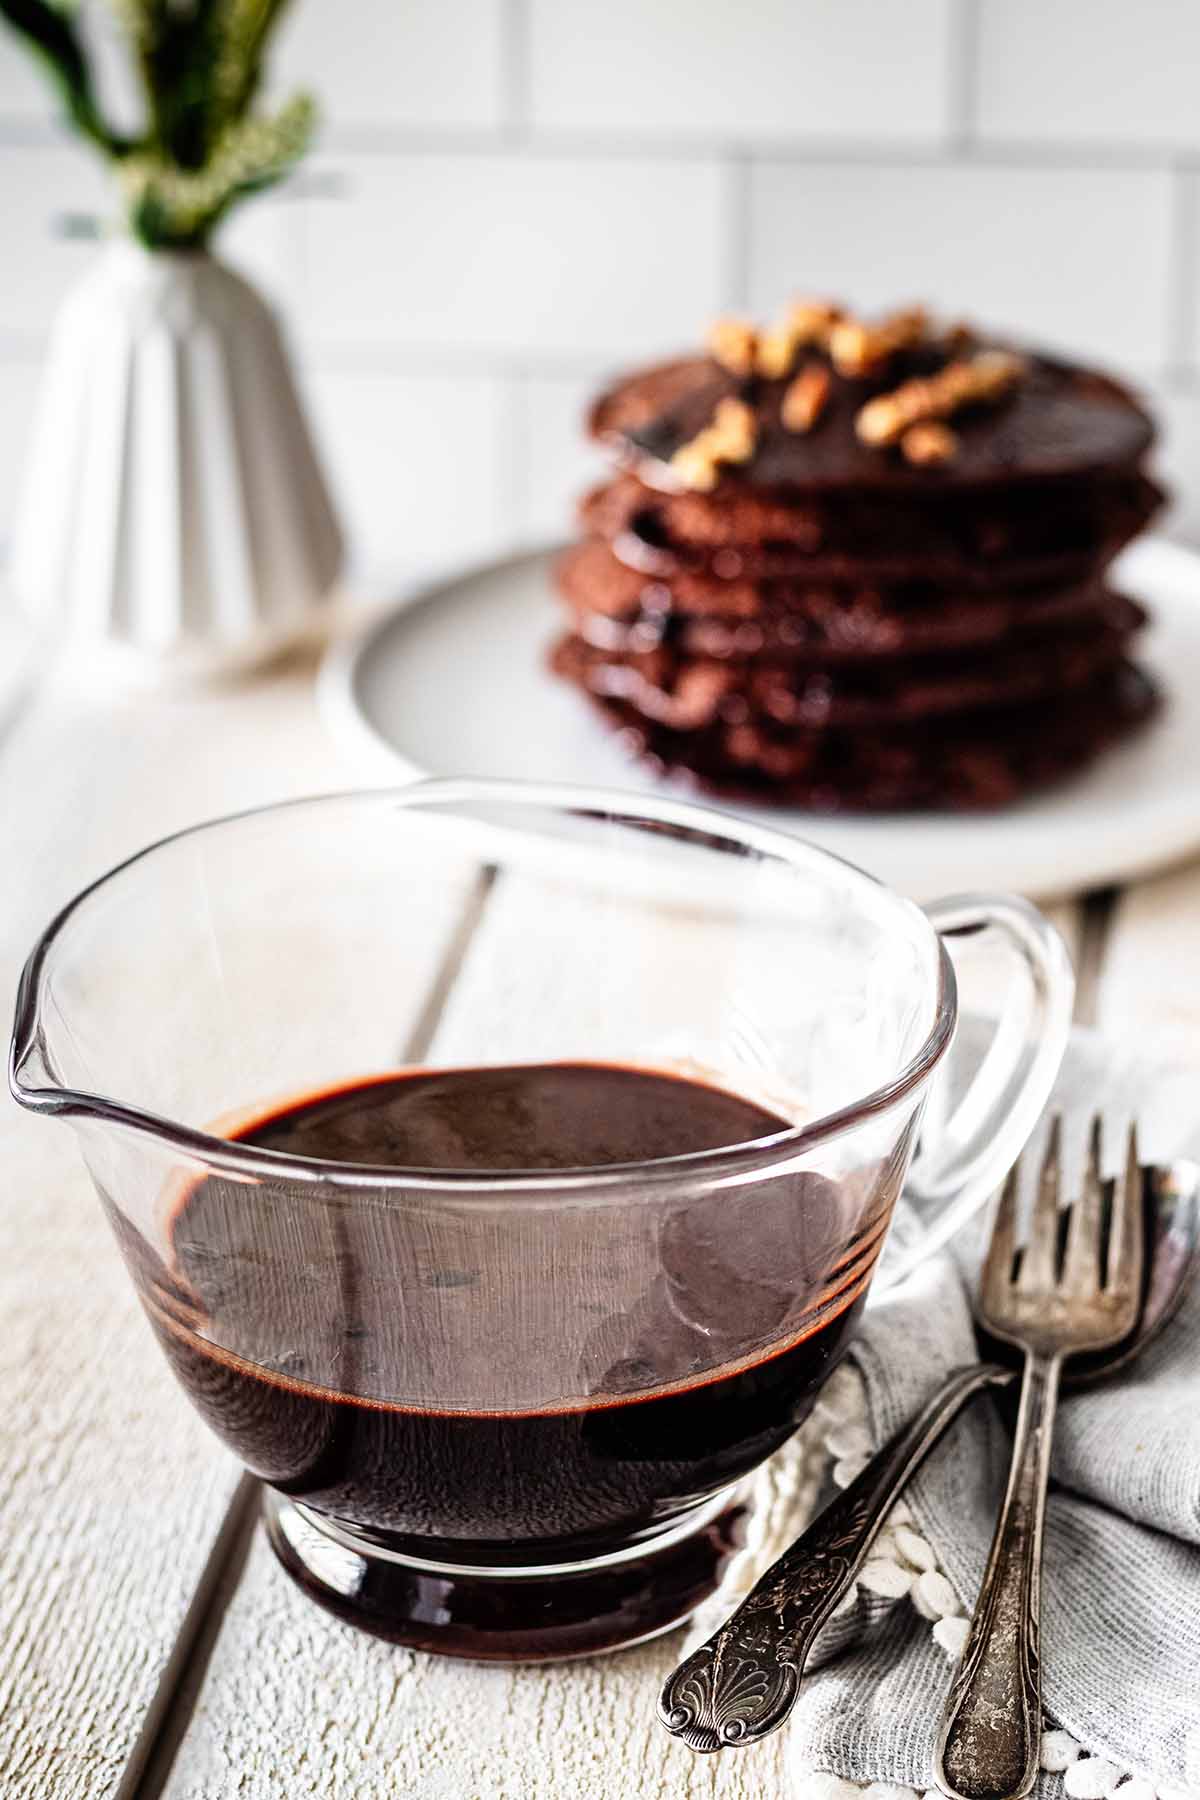 Chocolate pancake syrup in a small glass pitcher.